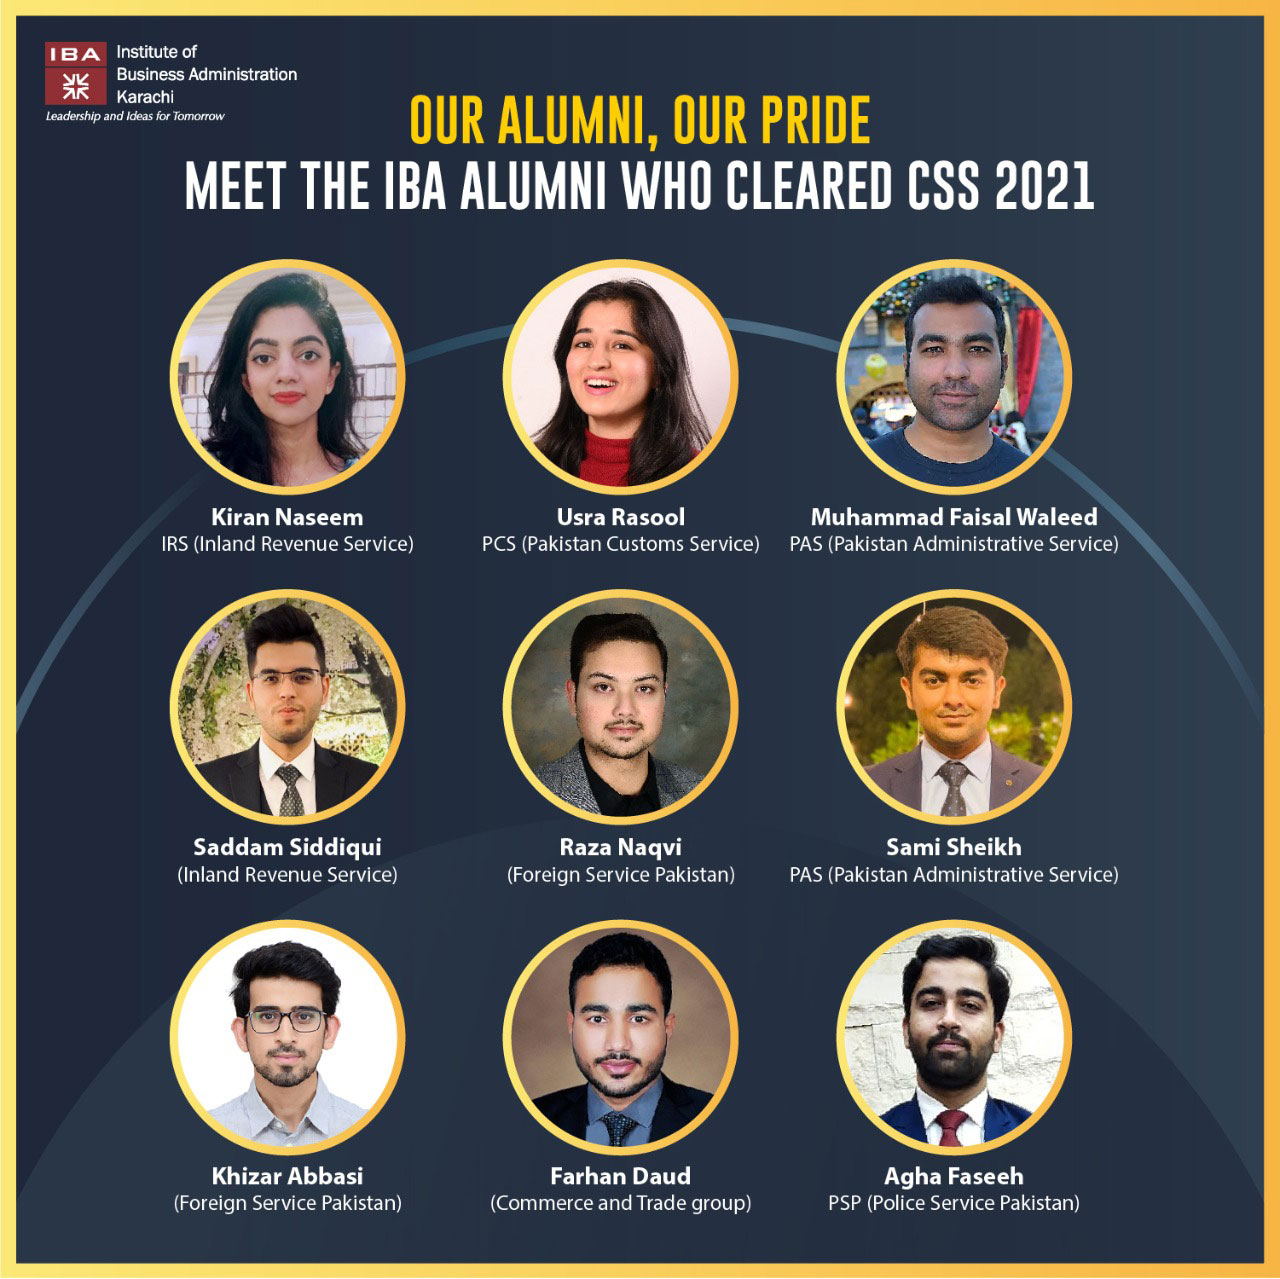 Meet the IBA Alumni who cleared the Central Superior Service (CSS) 2021 Exam